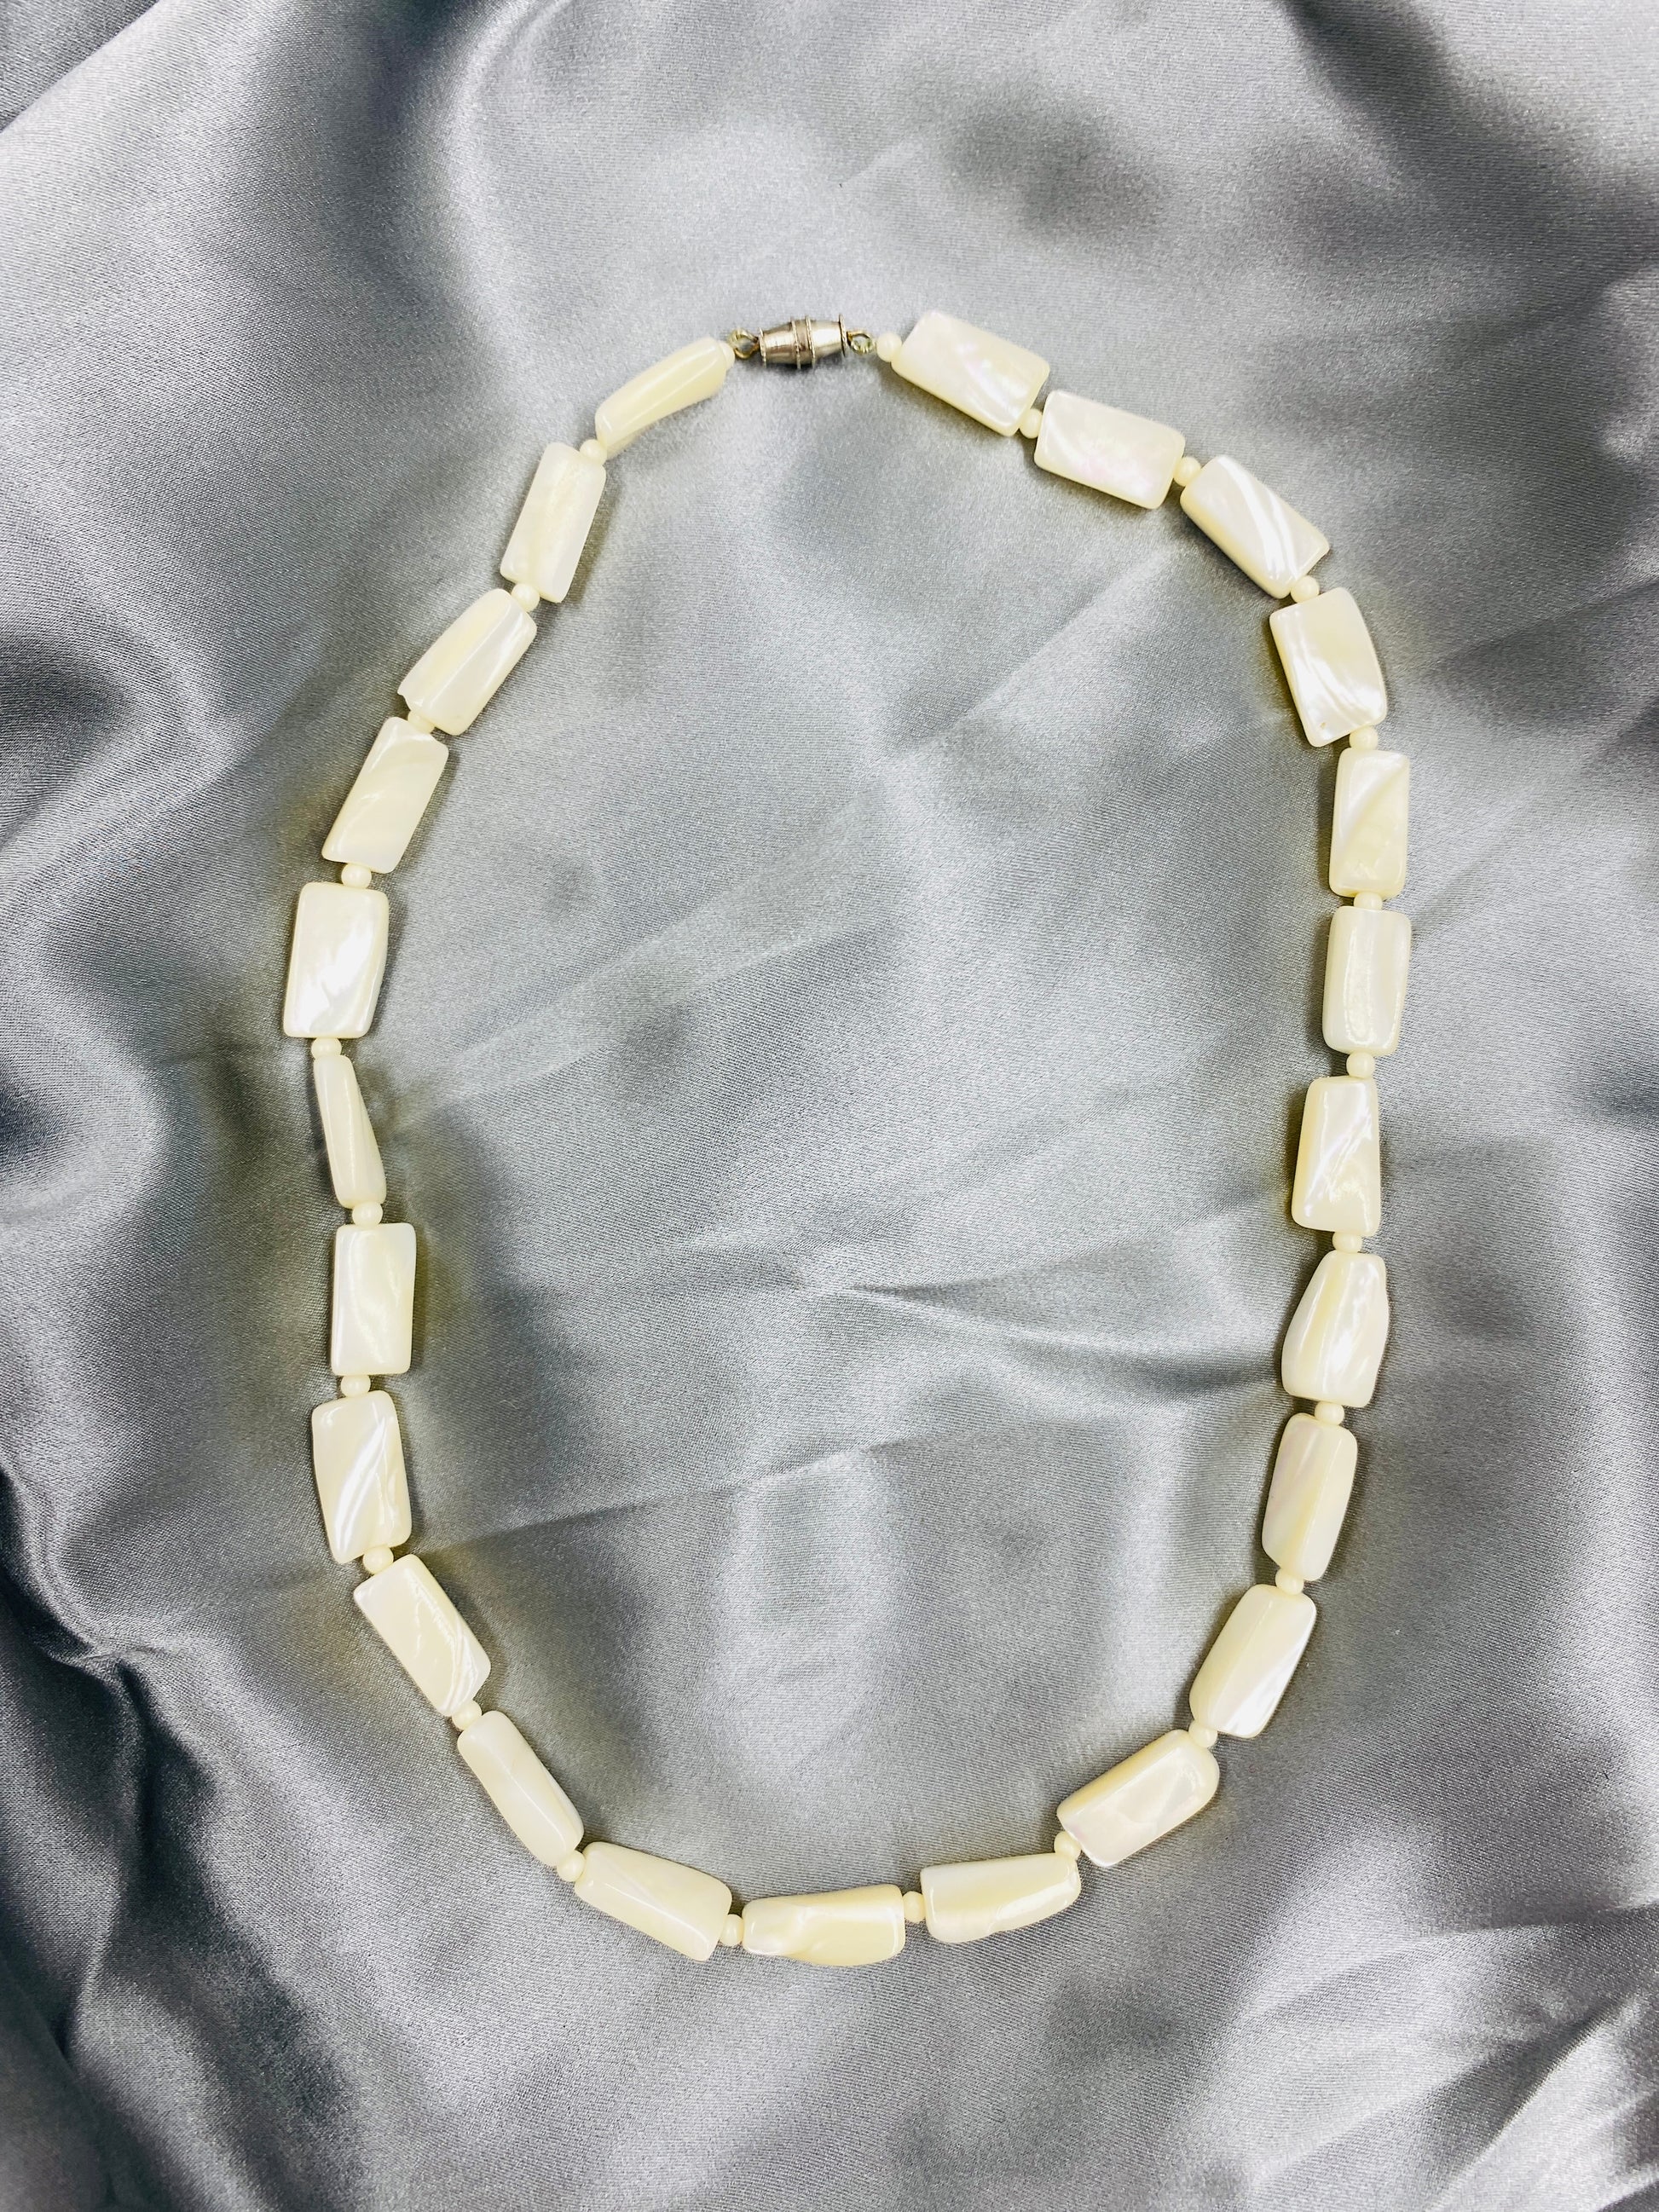 Vintage 1980s Rectangle Pearl Bead Necklace